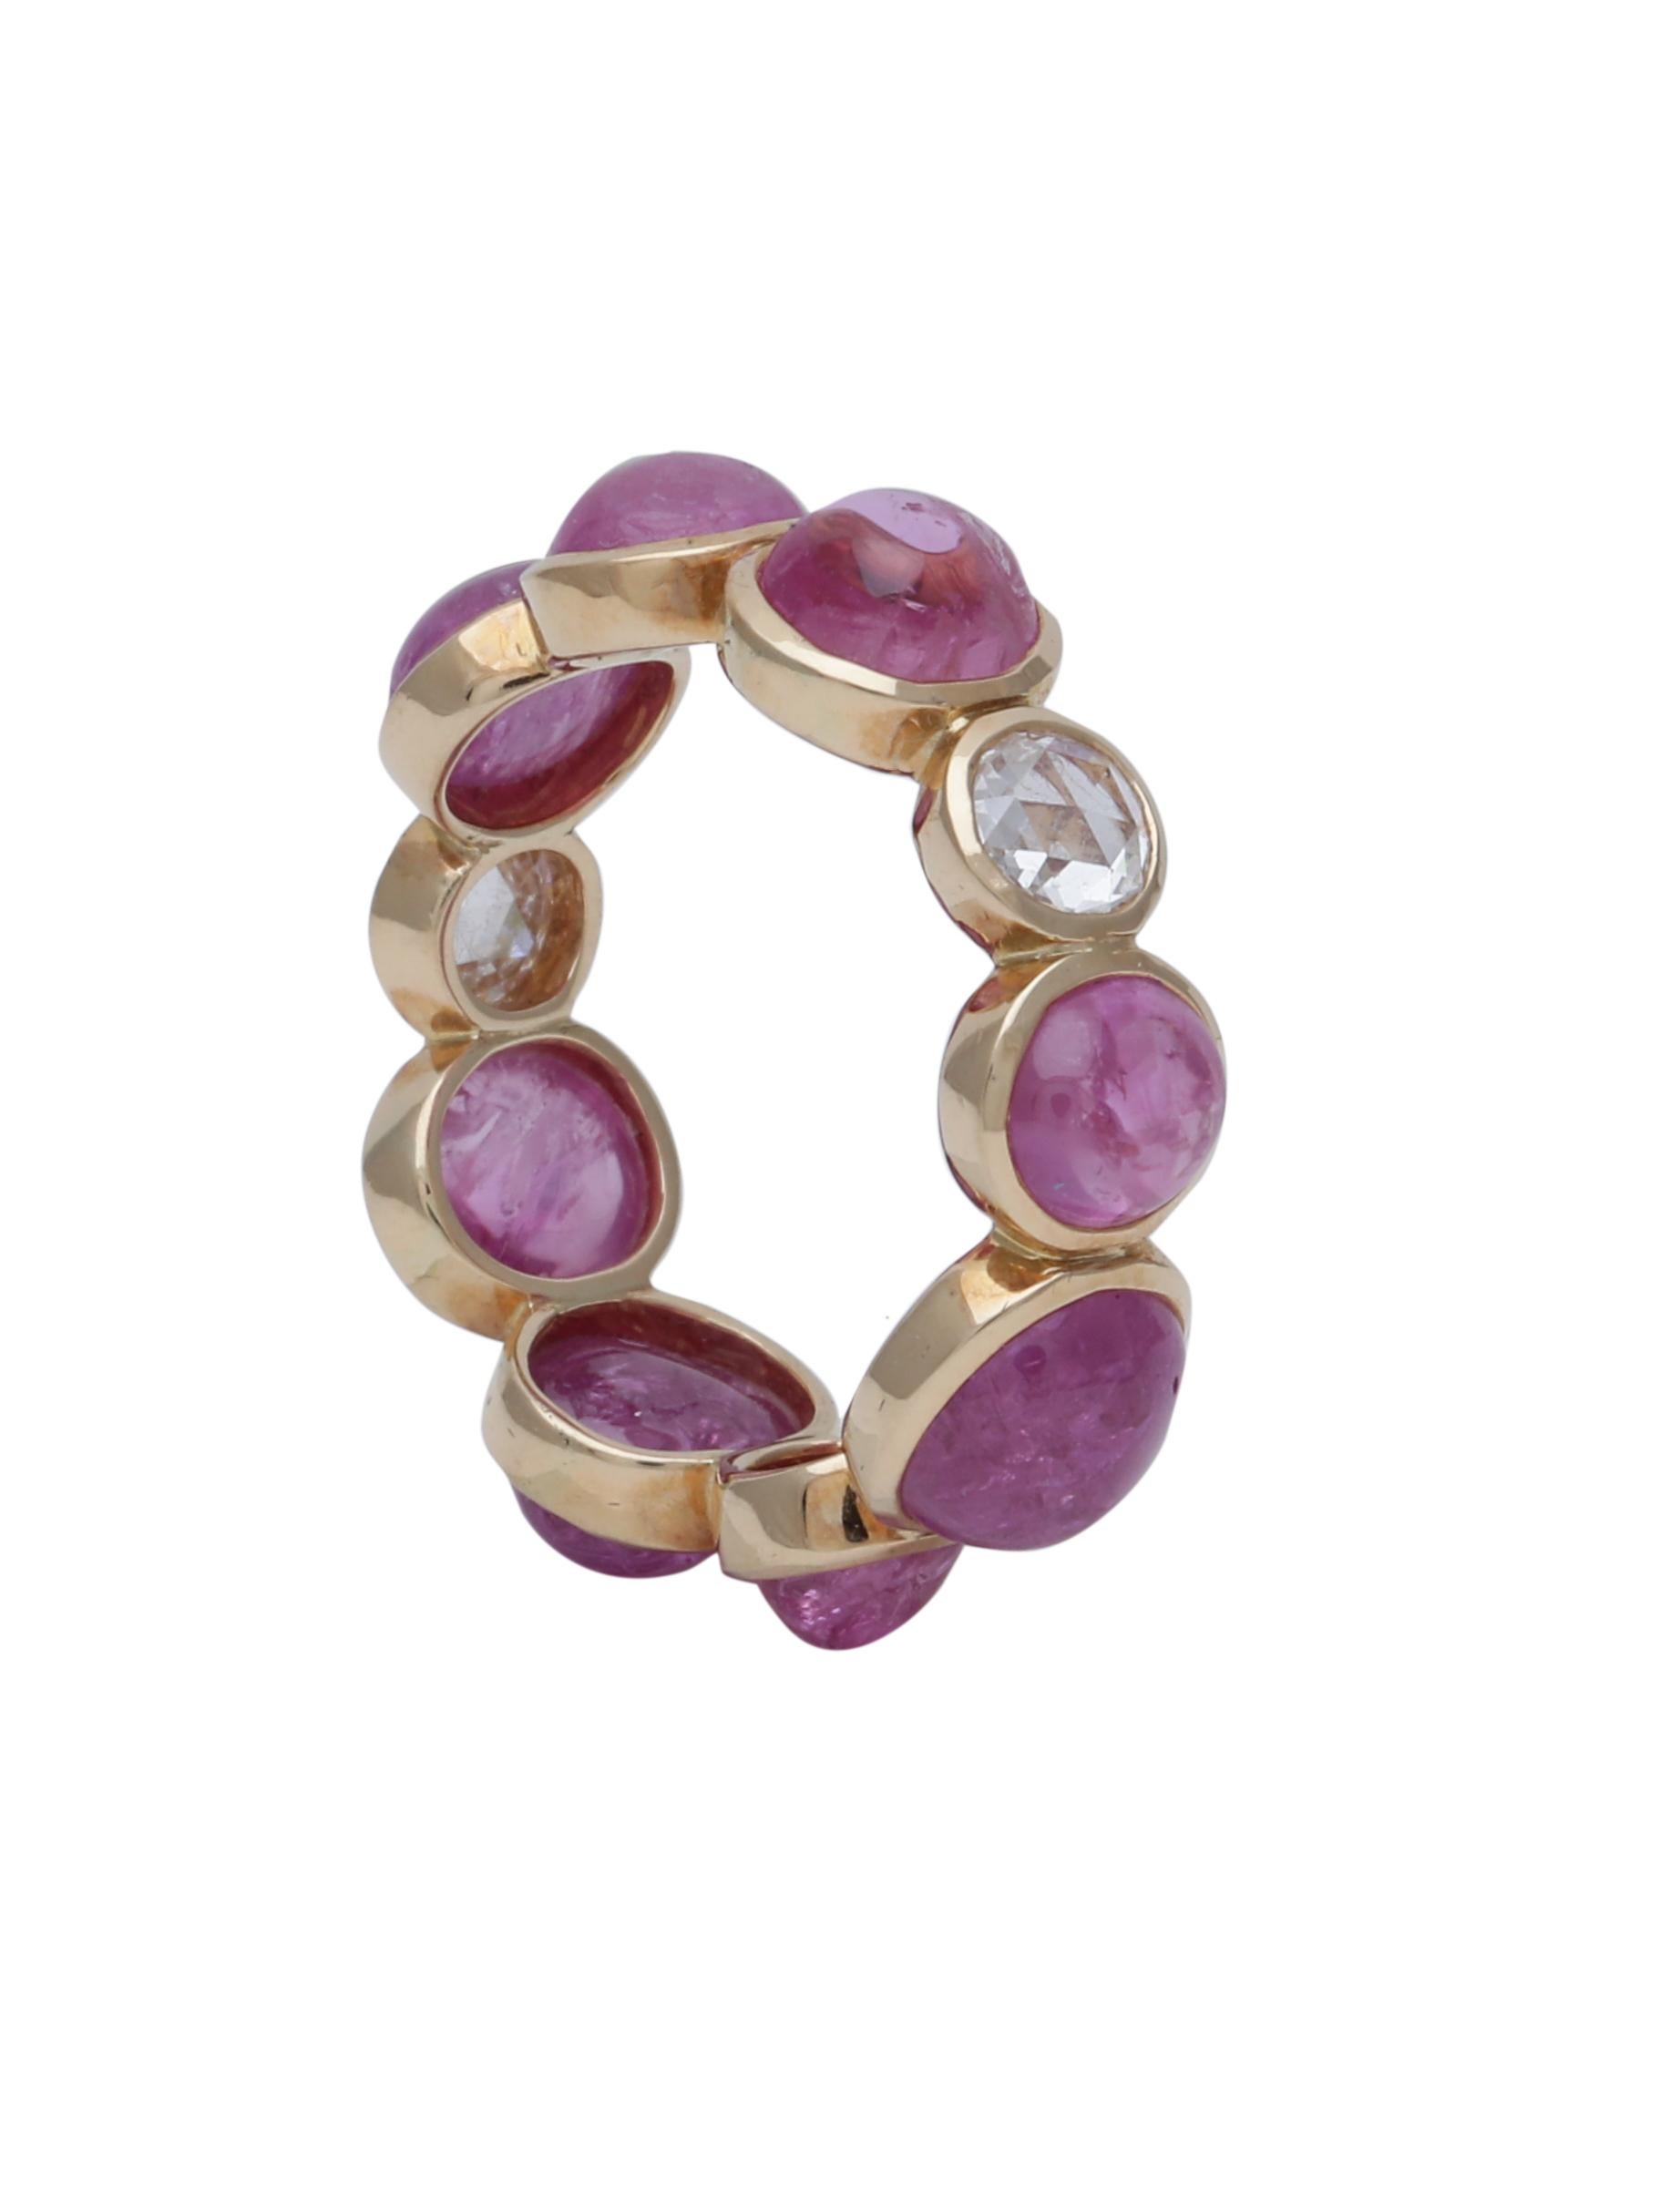 A natural Pink Ruby Cabochon Band with Round Rose cut diamonds carefully handcrafted in 18K Yellow Gold. The weight of the beautiful pink natural Rubies is 10.75cts and the Diamond Rosecuts are 0.50cts.

This could be worn as a stackable ring with